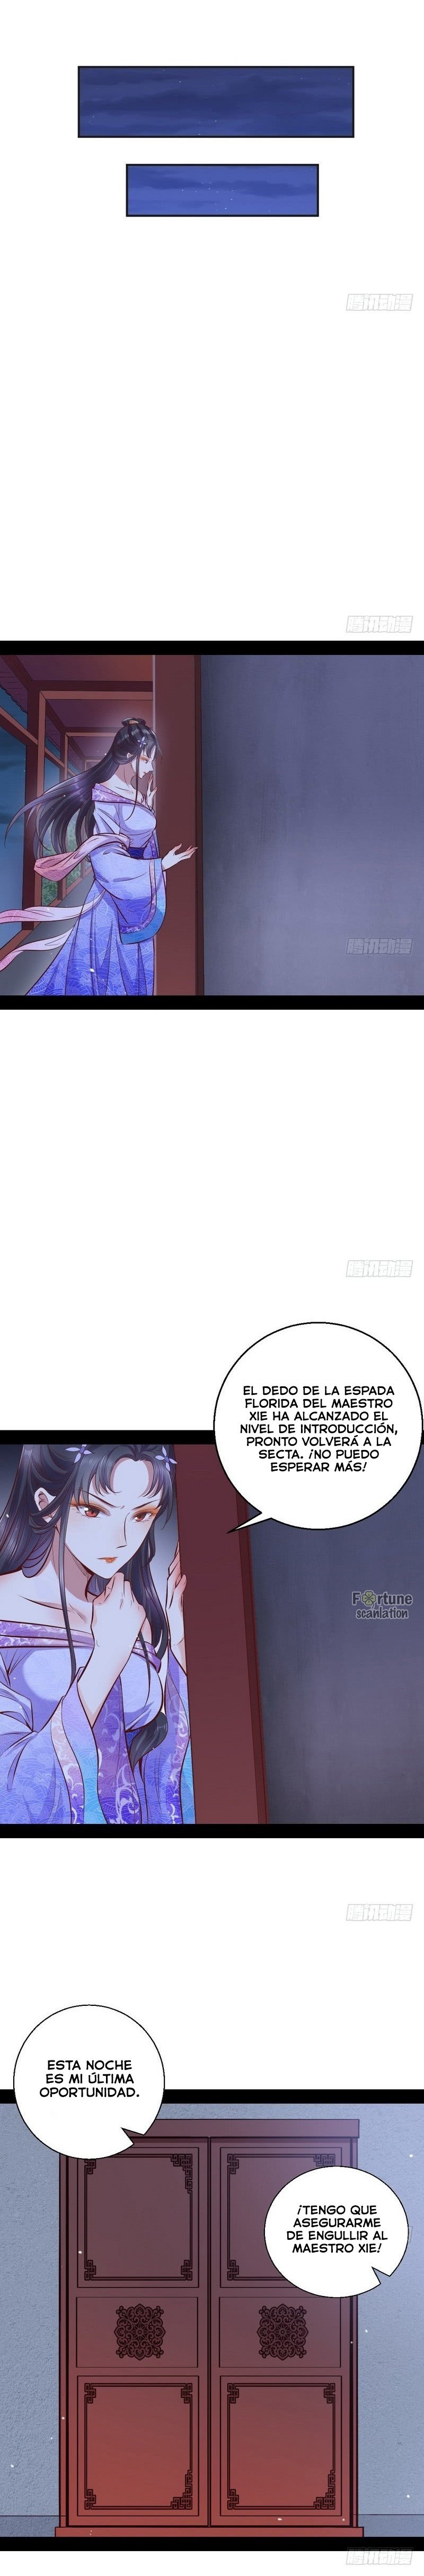 Manga Soy un dios maligno Chapter 29 image number 1